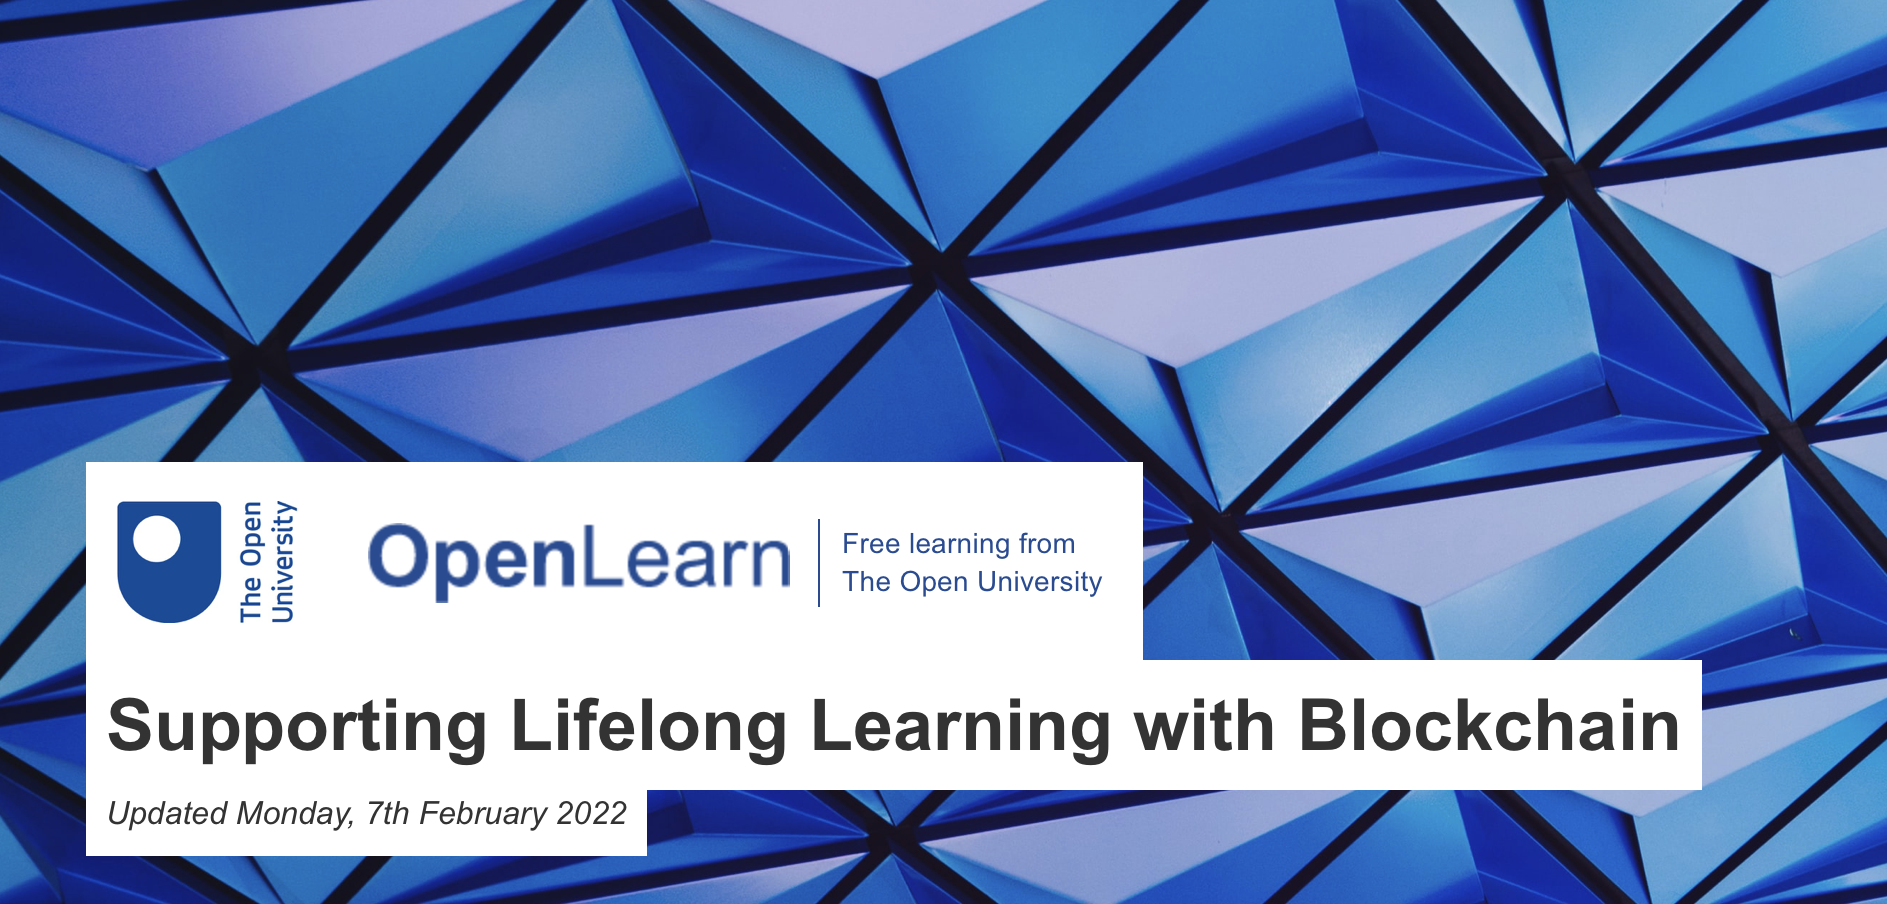 Blockchain articles featured in OpenLearn